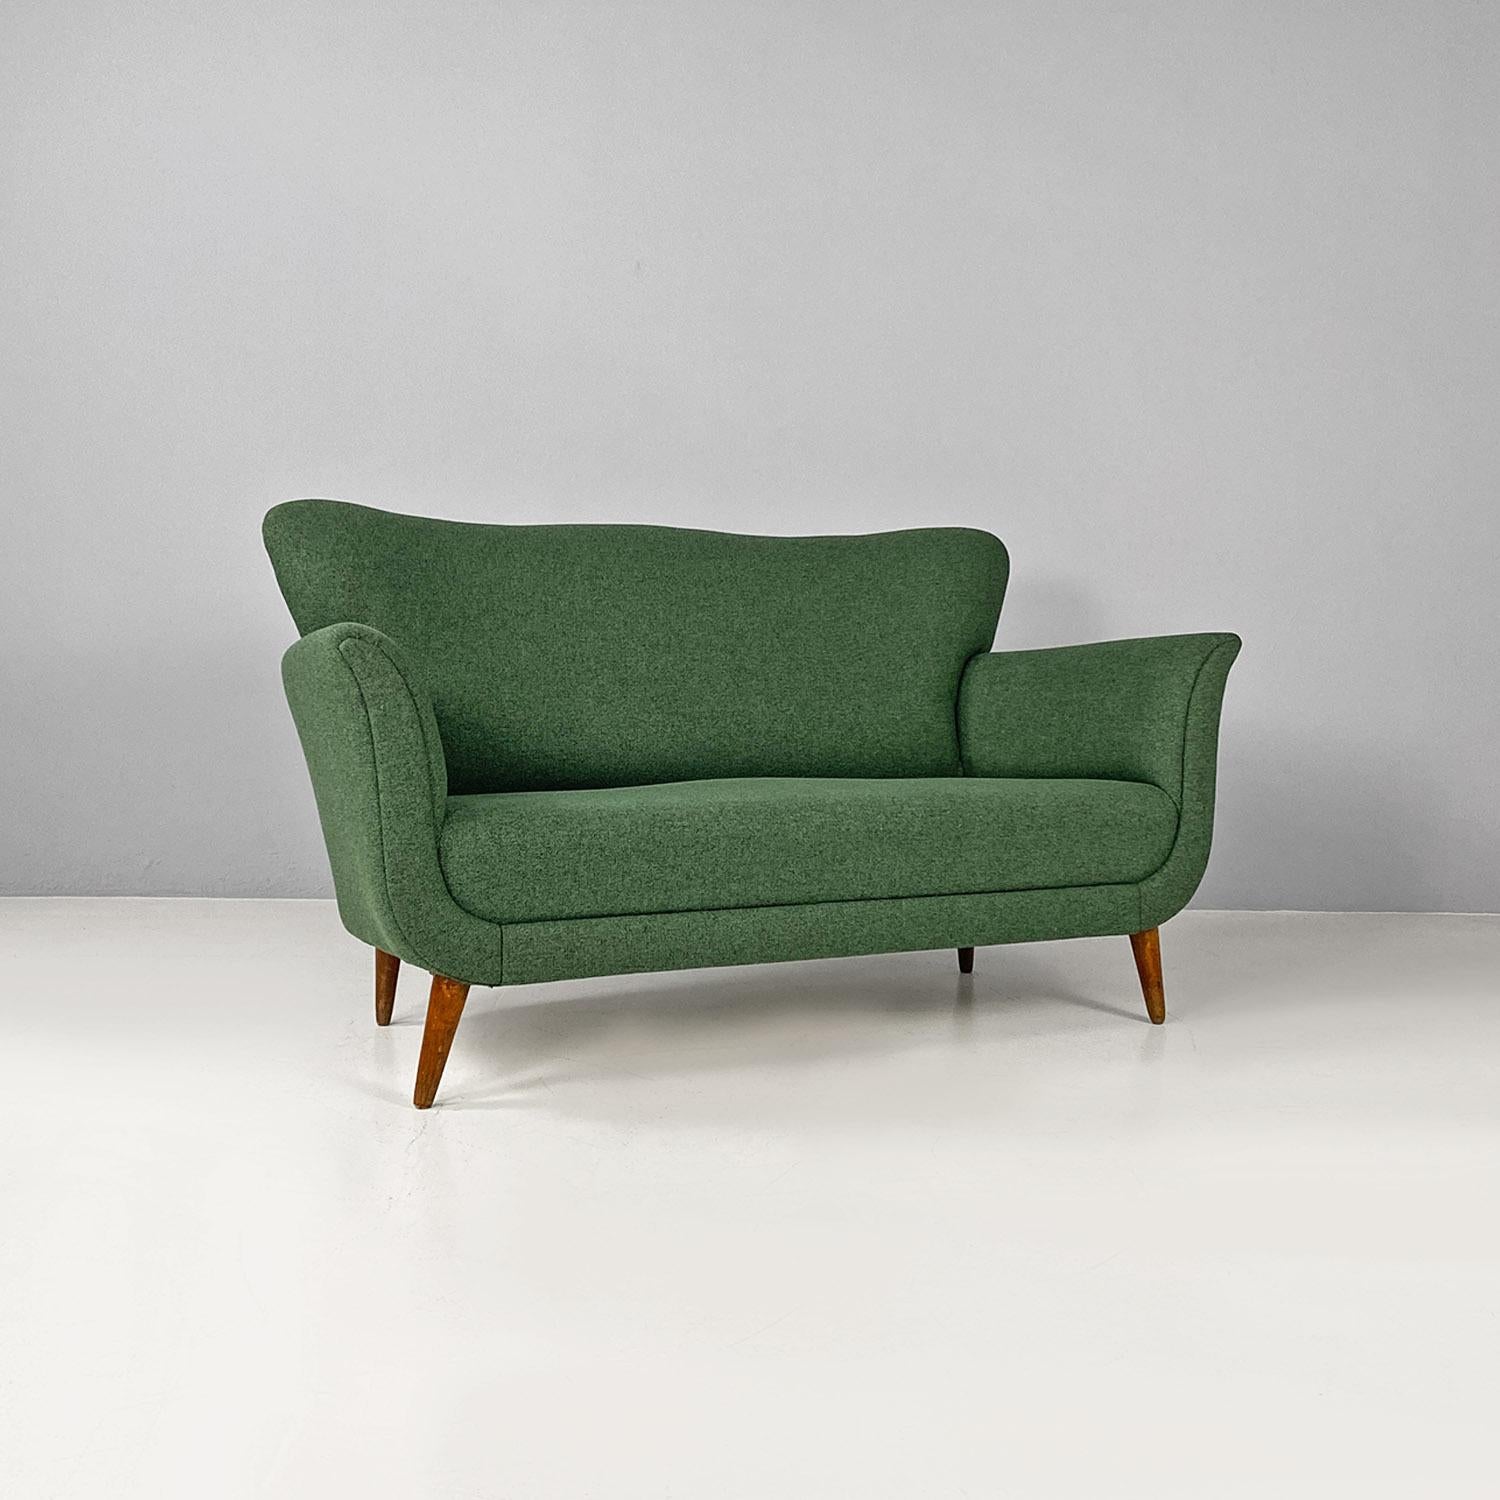 Two-seater sofa, covered in green fabric, with turned legs in beech wood and a beautiful, slightly wavy profile of the backrest and armrests.
1950 ca.
Excellent condition, restored and upholstered with new fabric.
Measurements in cm